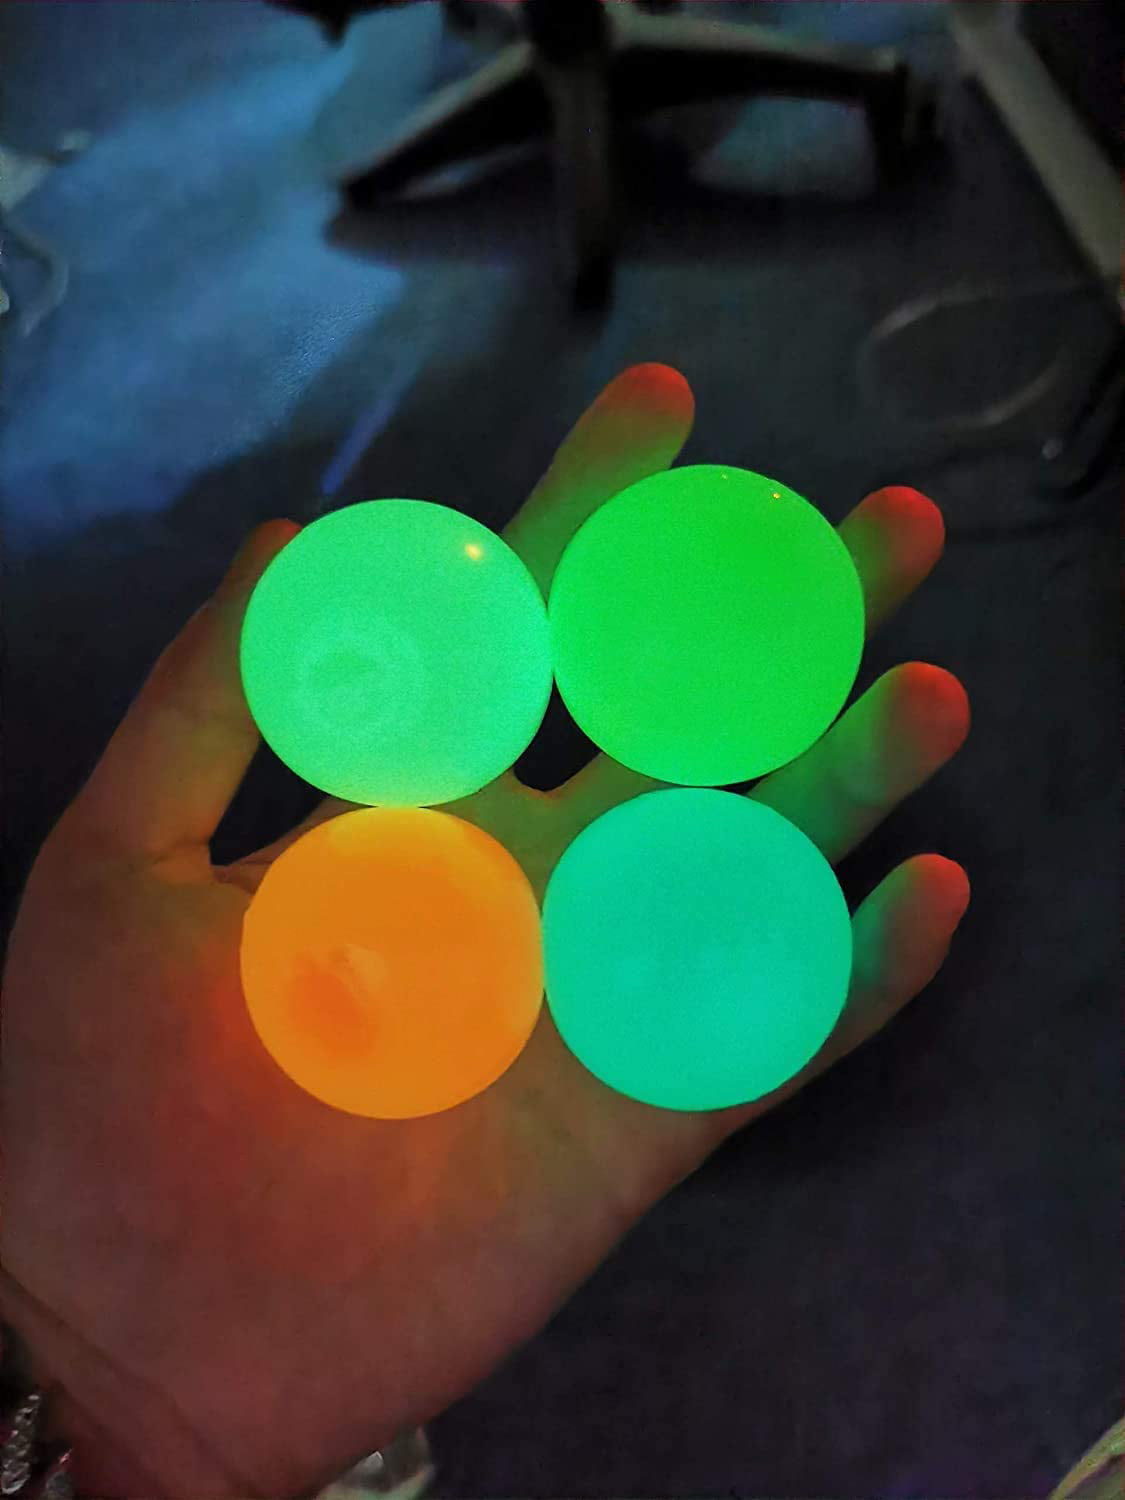 Anxiety OCD Non-Toxic Squishy Glow Stress Relief Toys for Kids and Adults Tear-Resistant 4 Pcs Luminescent Glow Stress Relief Balls Sticky Ball Fun Toy for ADHD